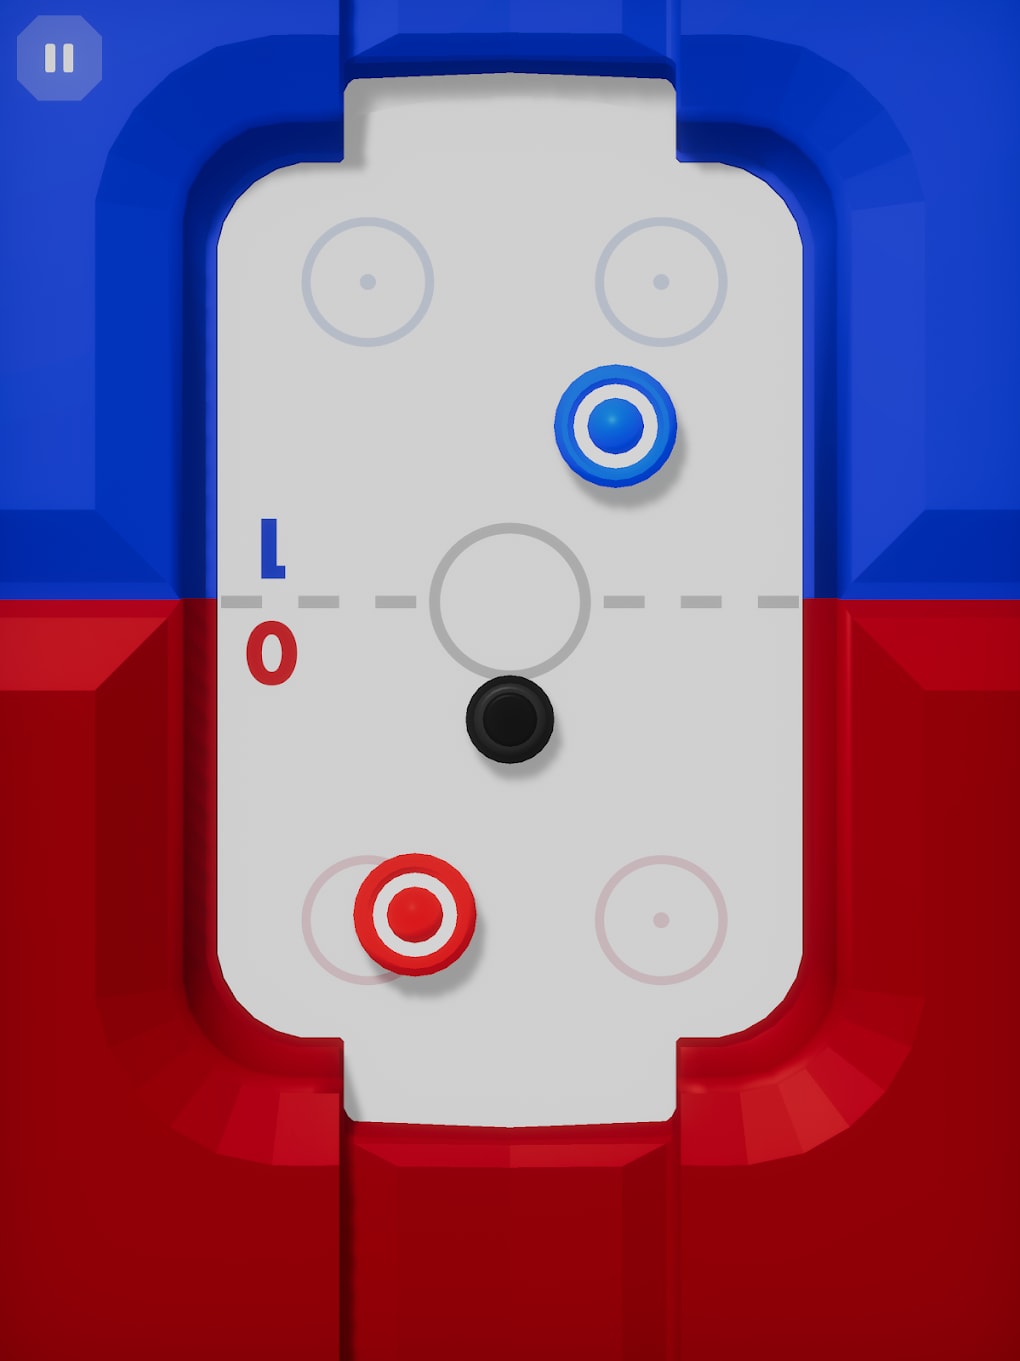 2 Player Games APK (Android Game) - Free Download